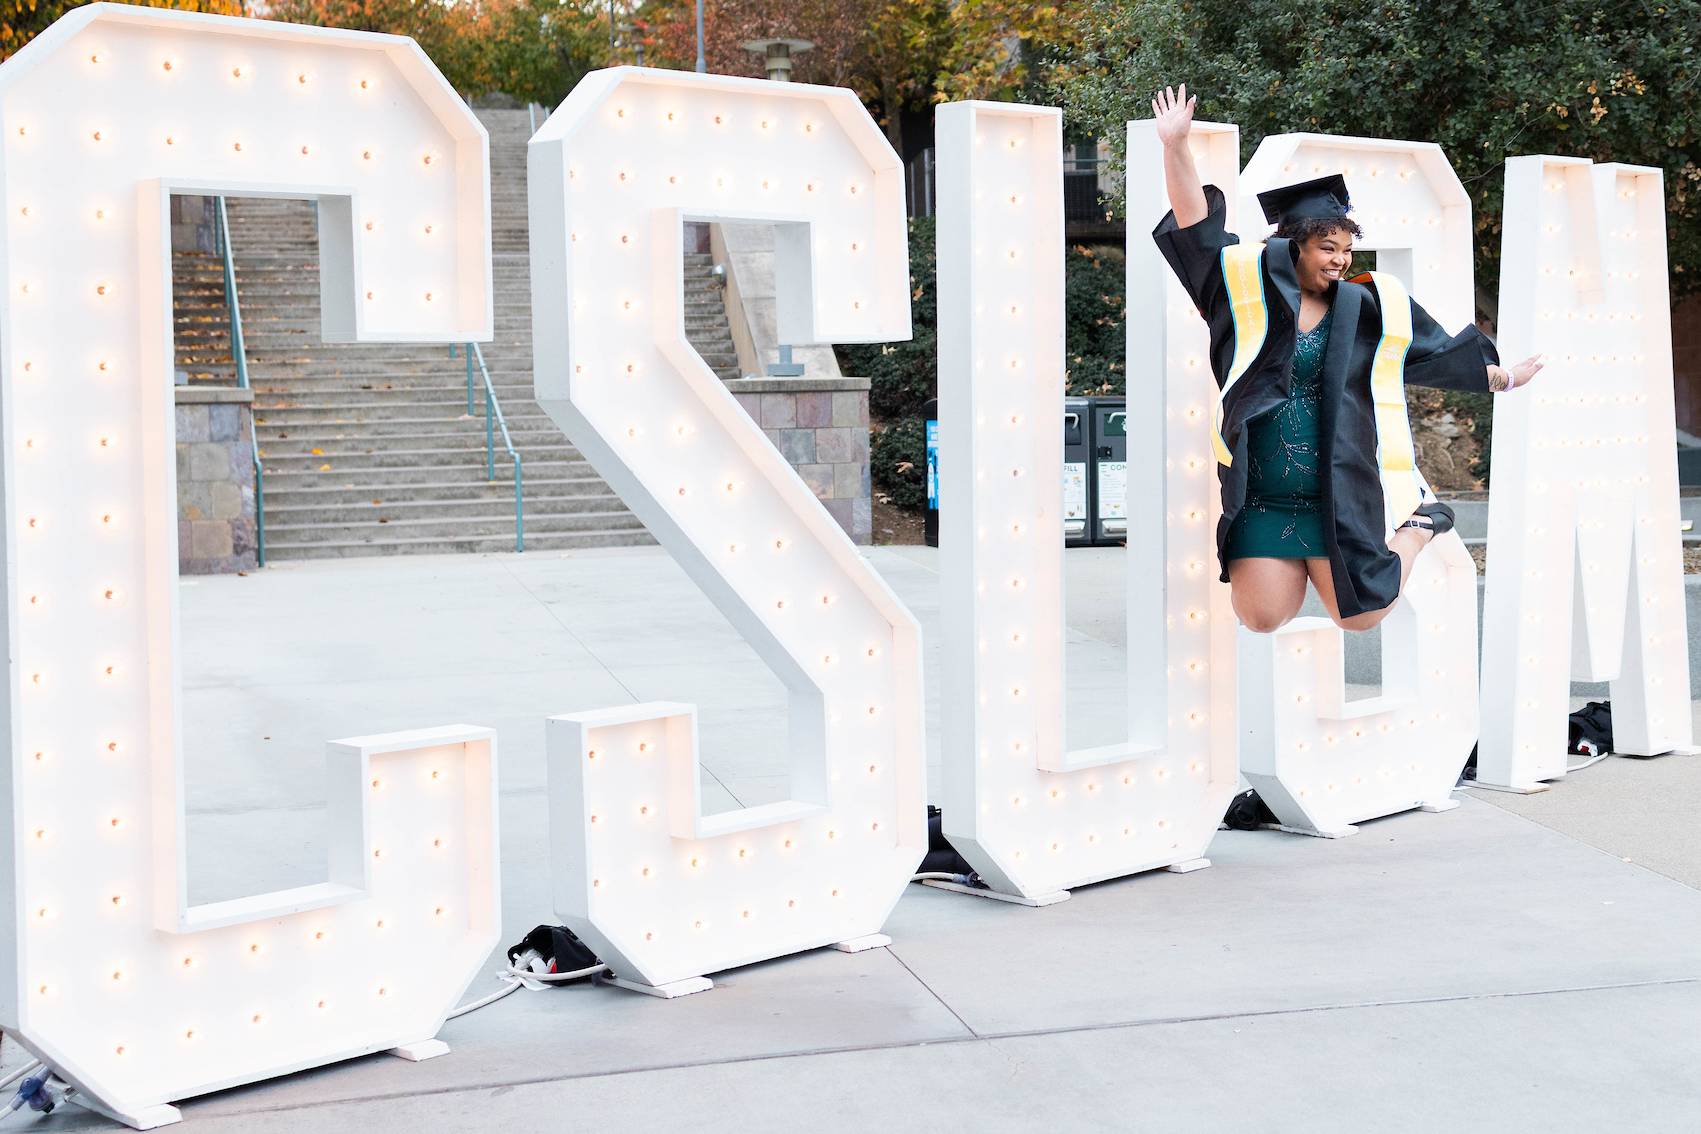 CSUSM grad jumping in front of CSUSM marquee letters